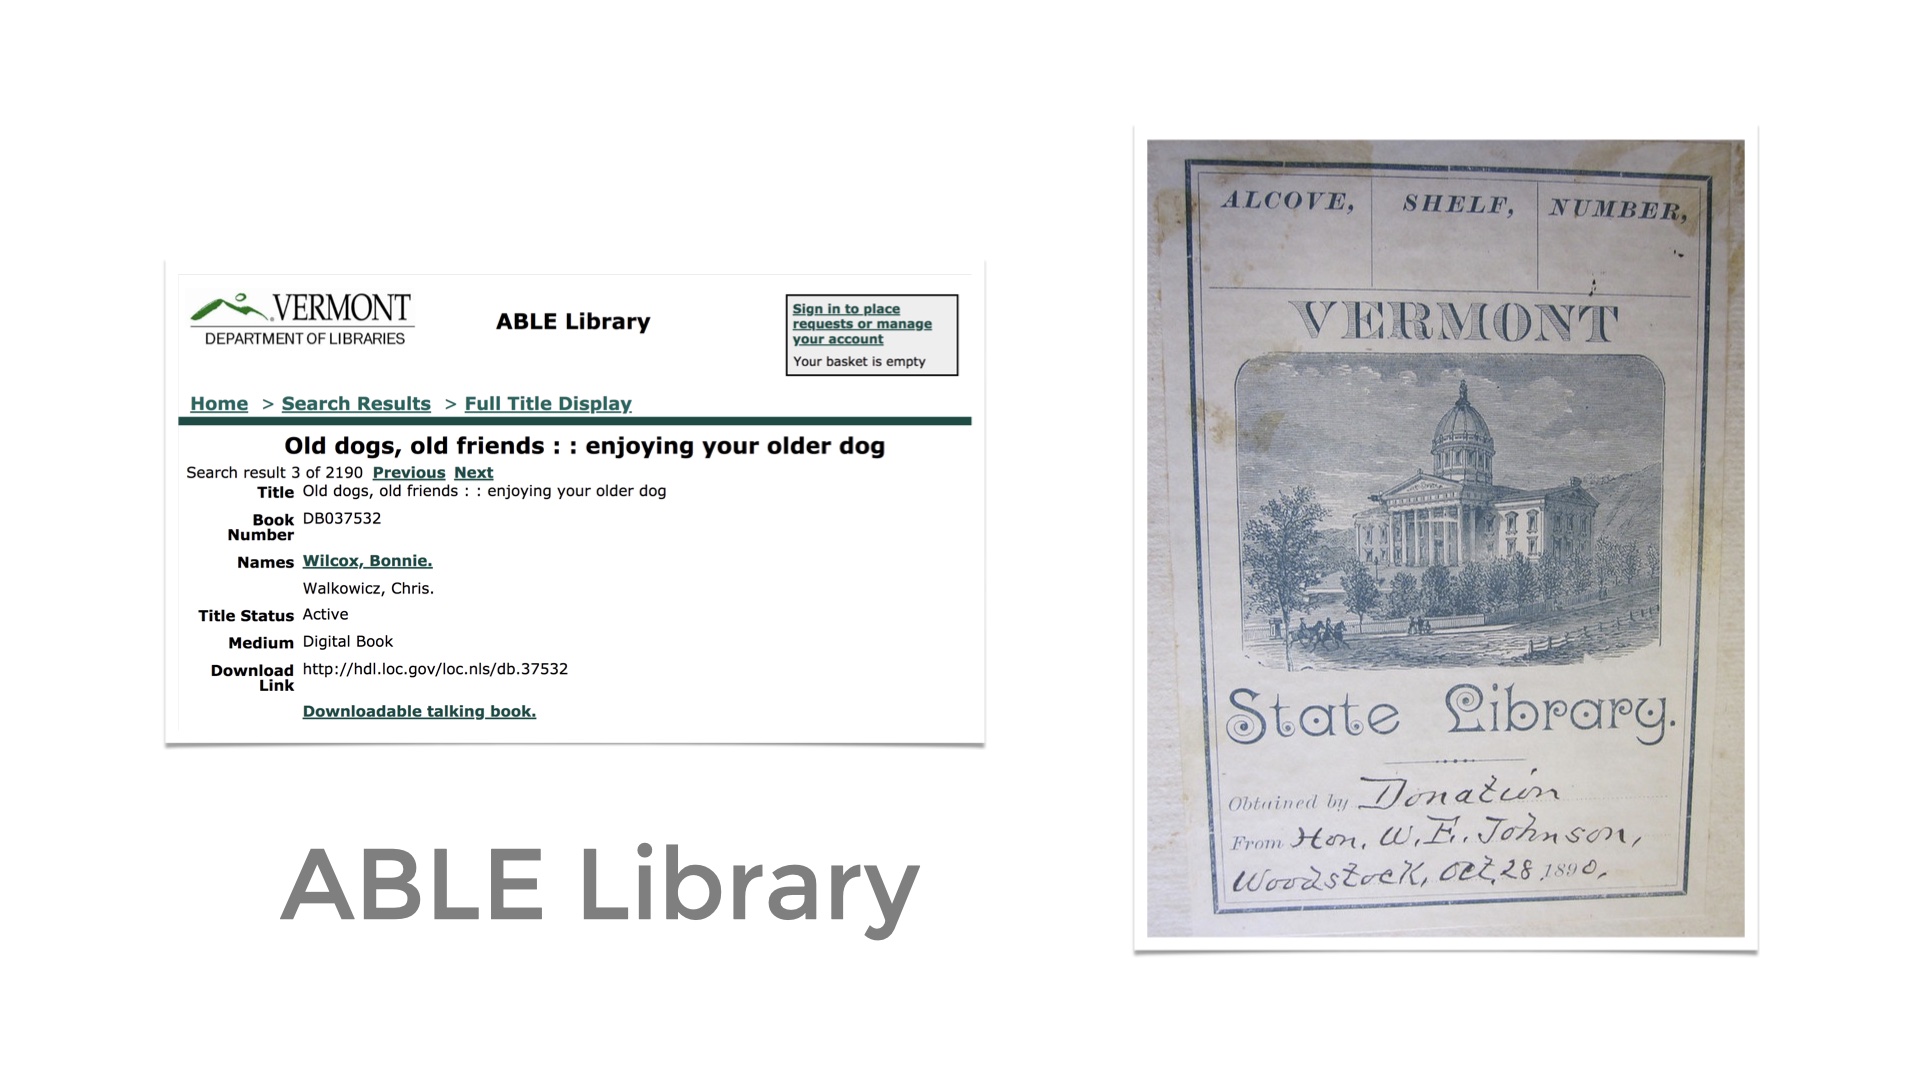 Screenshot of the ABLE Library website and a bookplate from the State Library. Text: ABLE Library